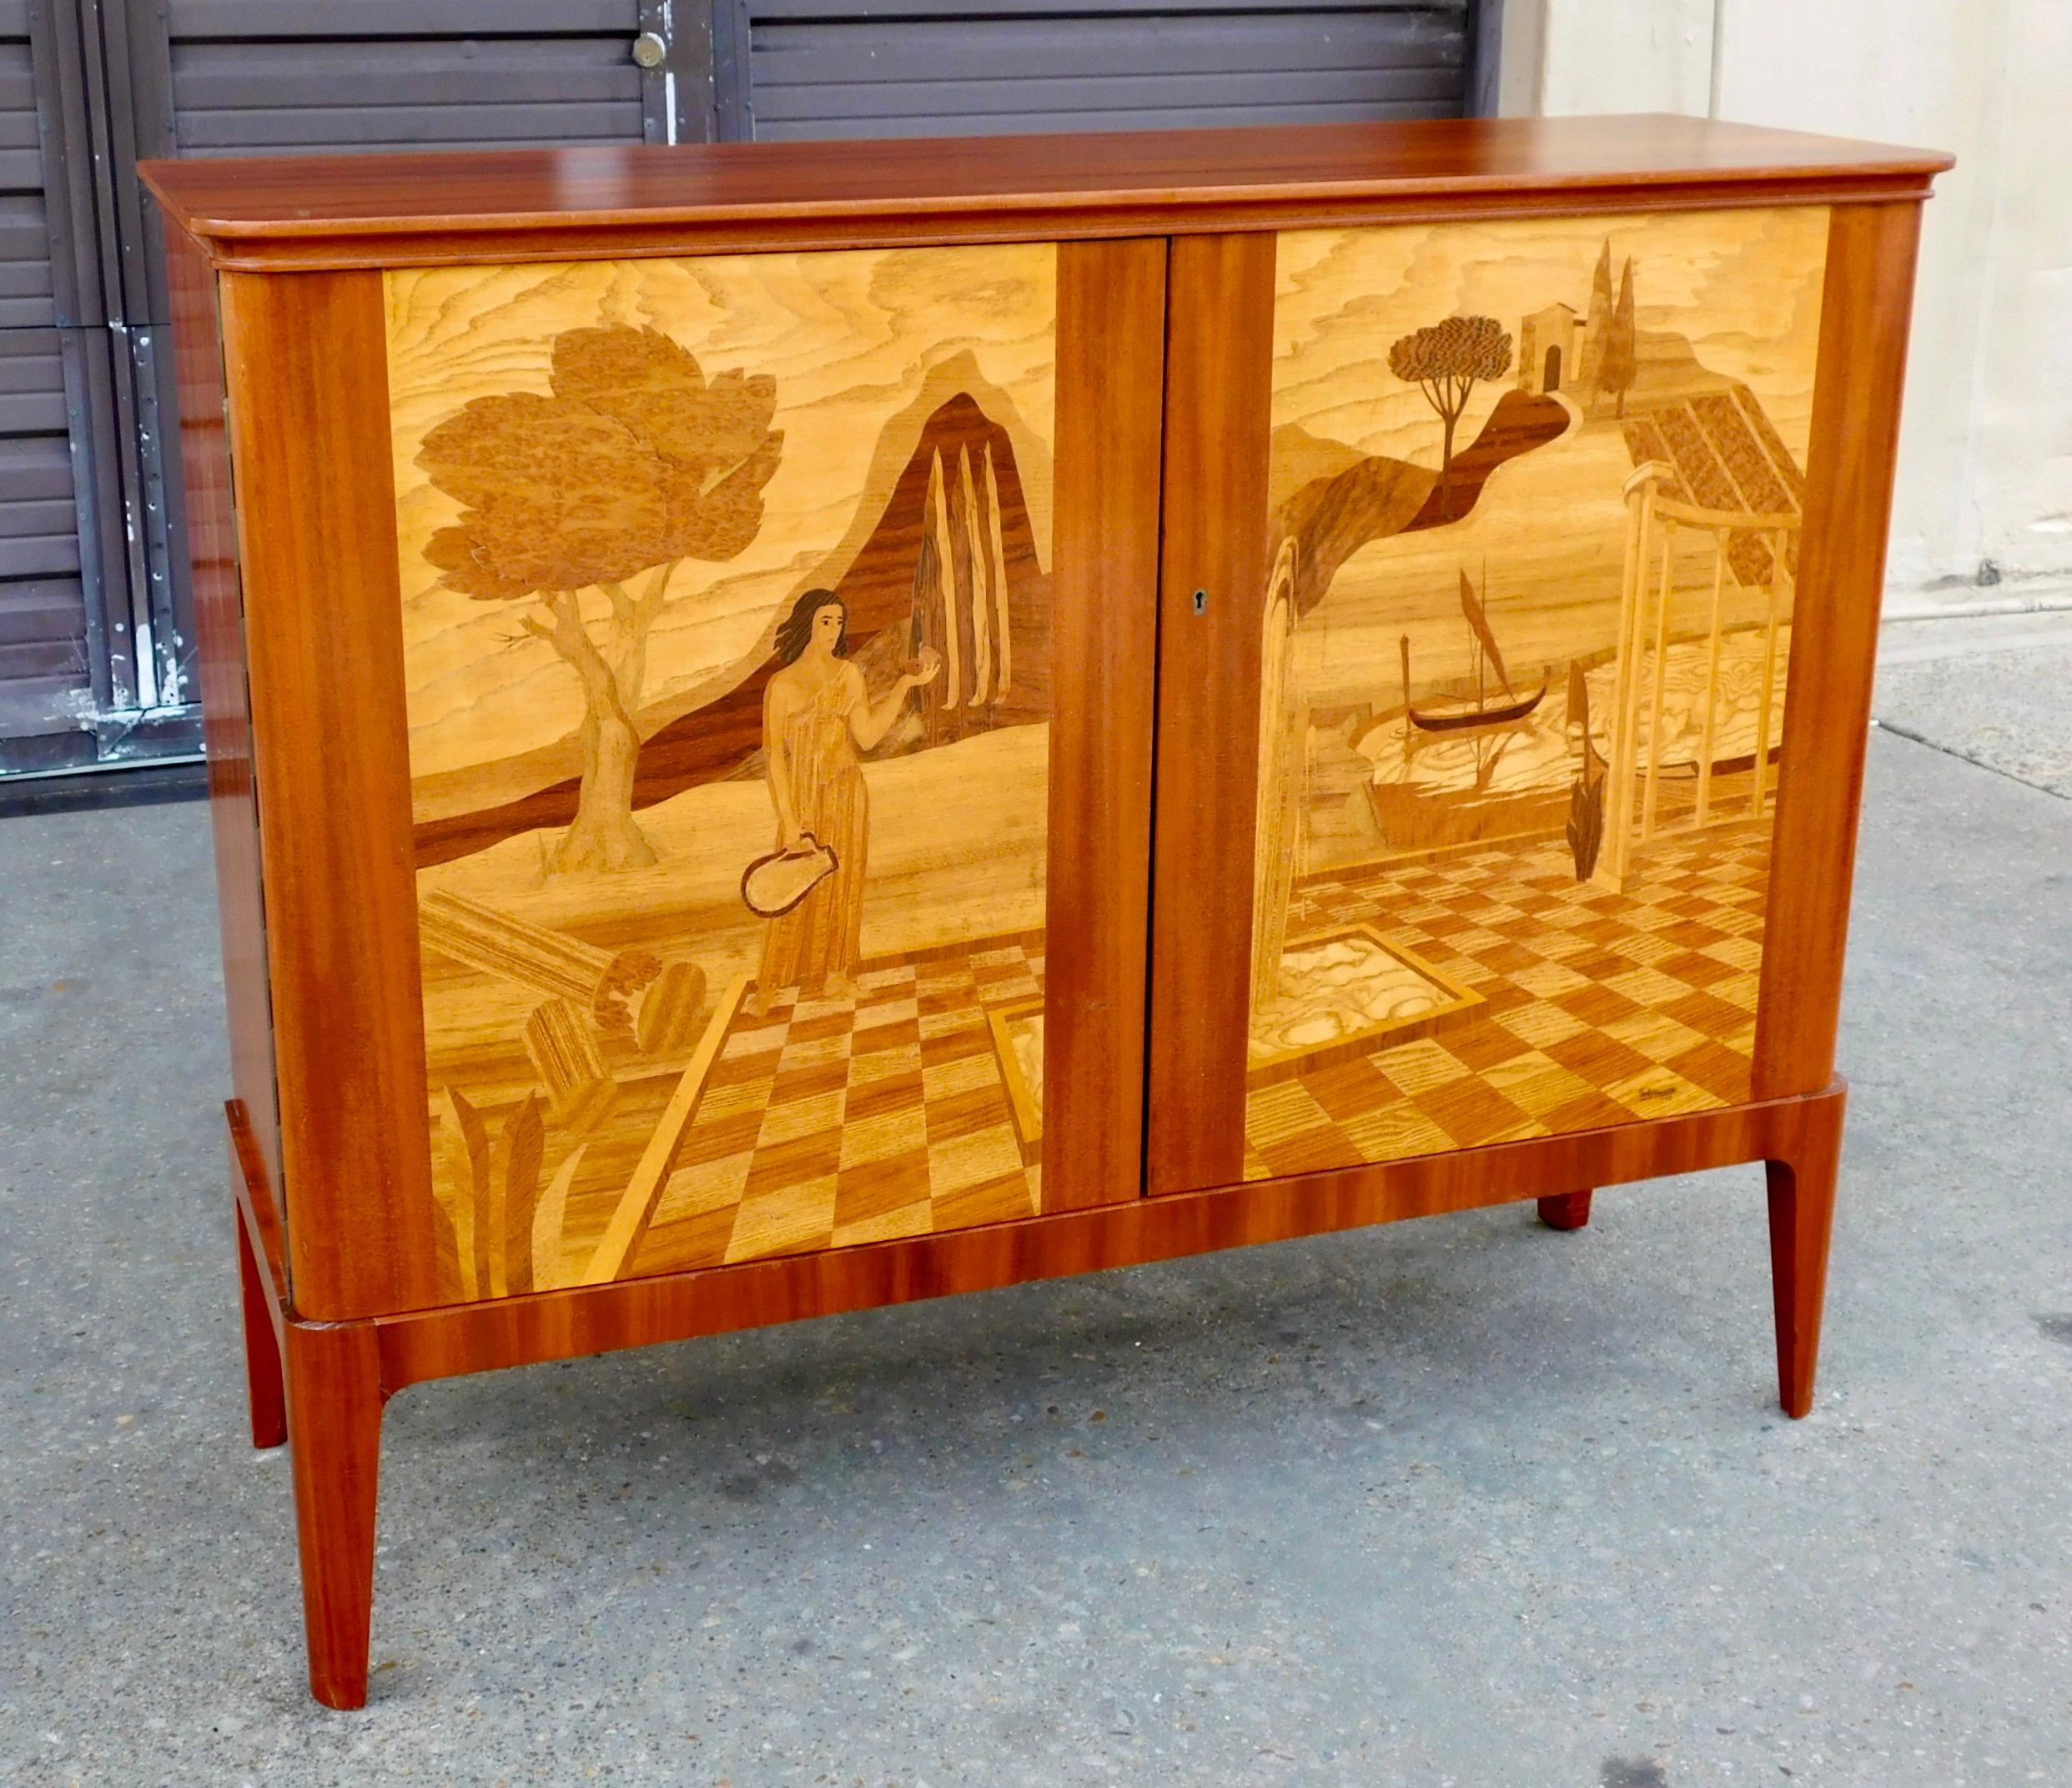 Exceptional Swedish moderne era storage cabinet by Erik Matsson (signed 1943) for Mjölby Intarsia.
Rendered in mahogany and birch wood. Inlaid friezes, depicting Mediterranean classical scenes, in rosewood, elm root and birch wood.
Interior in